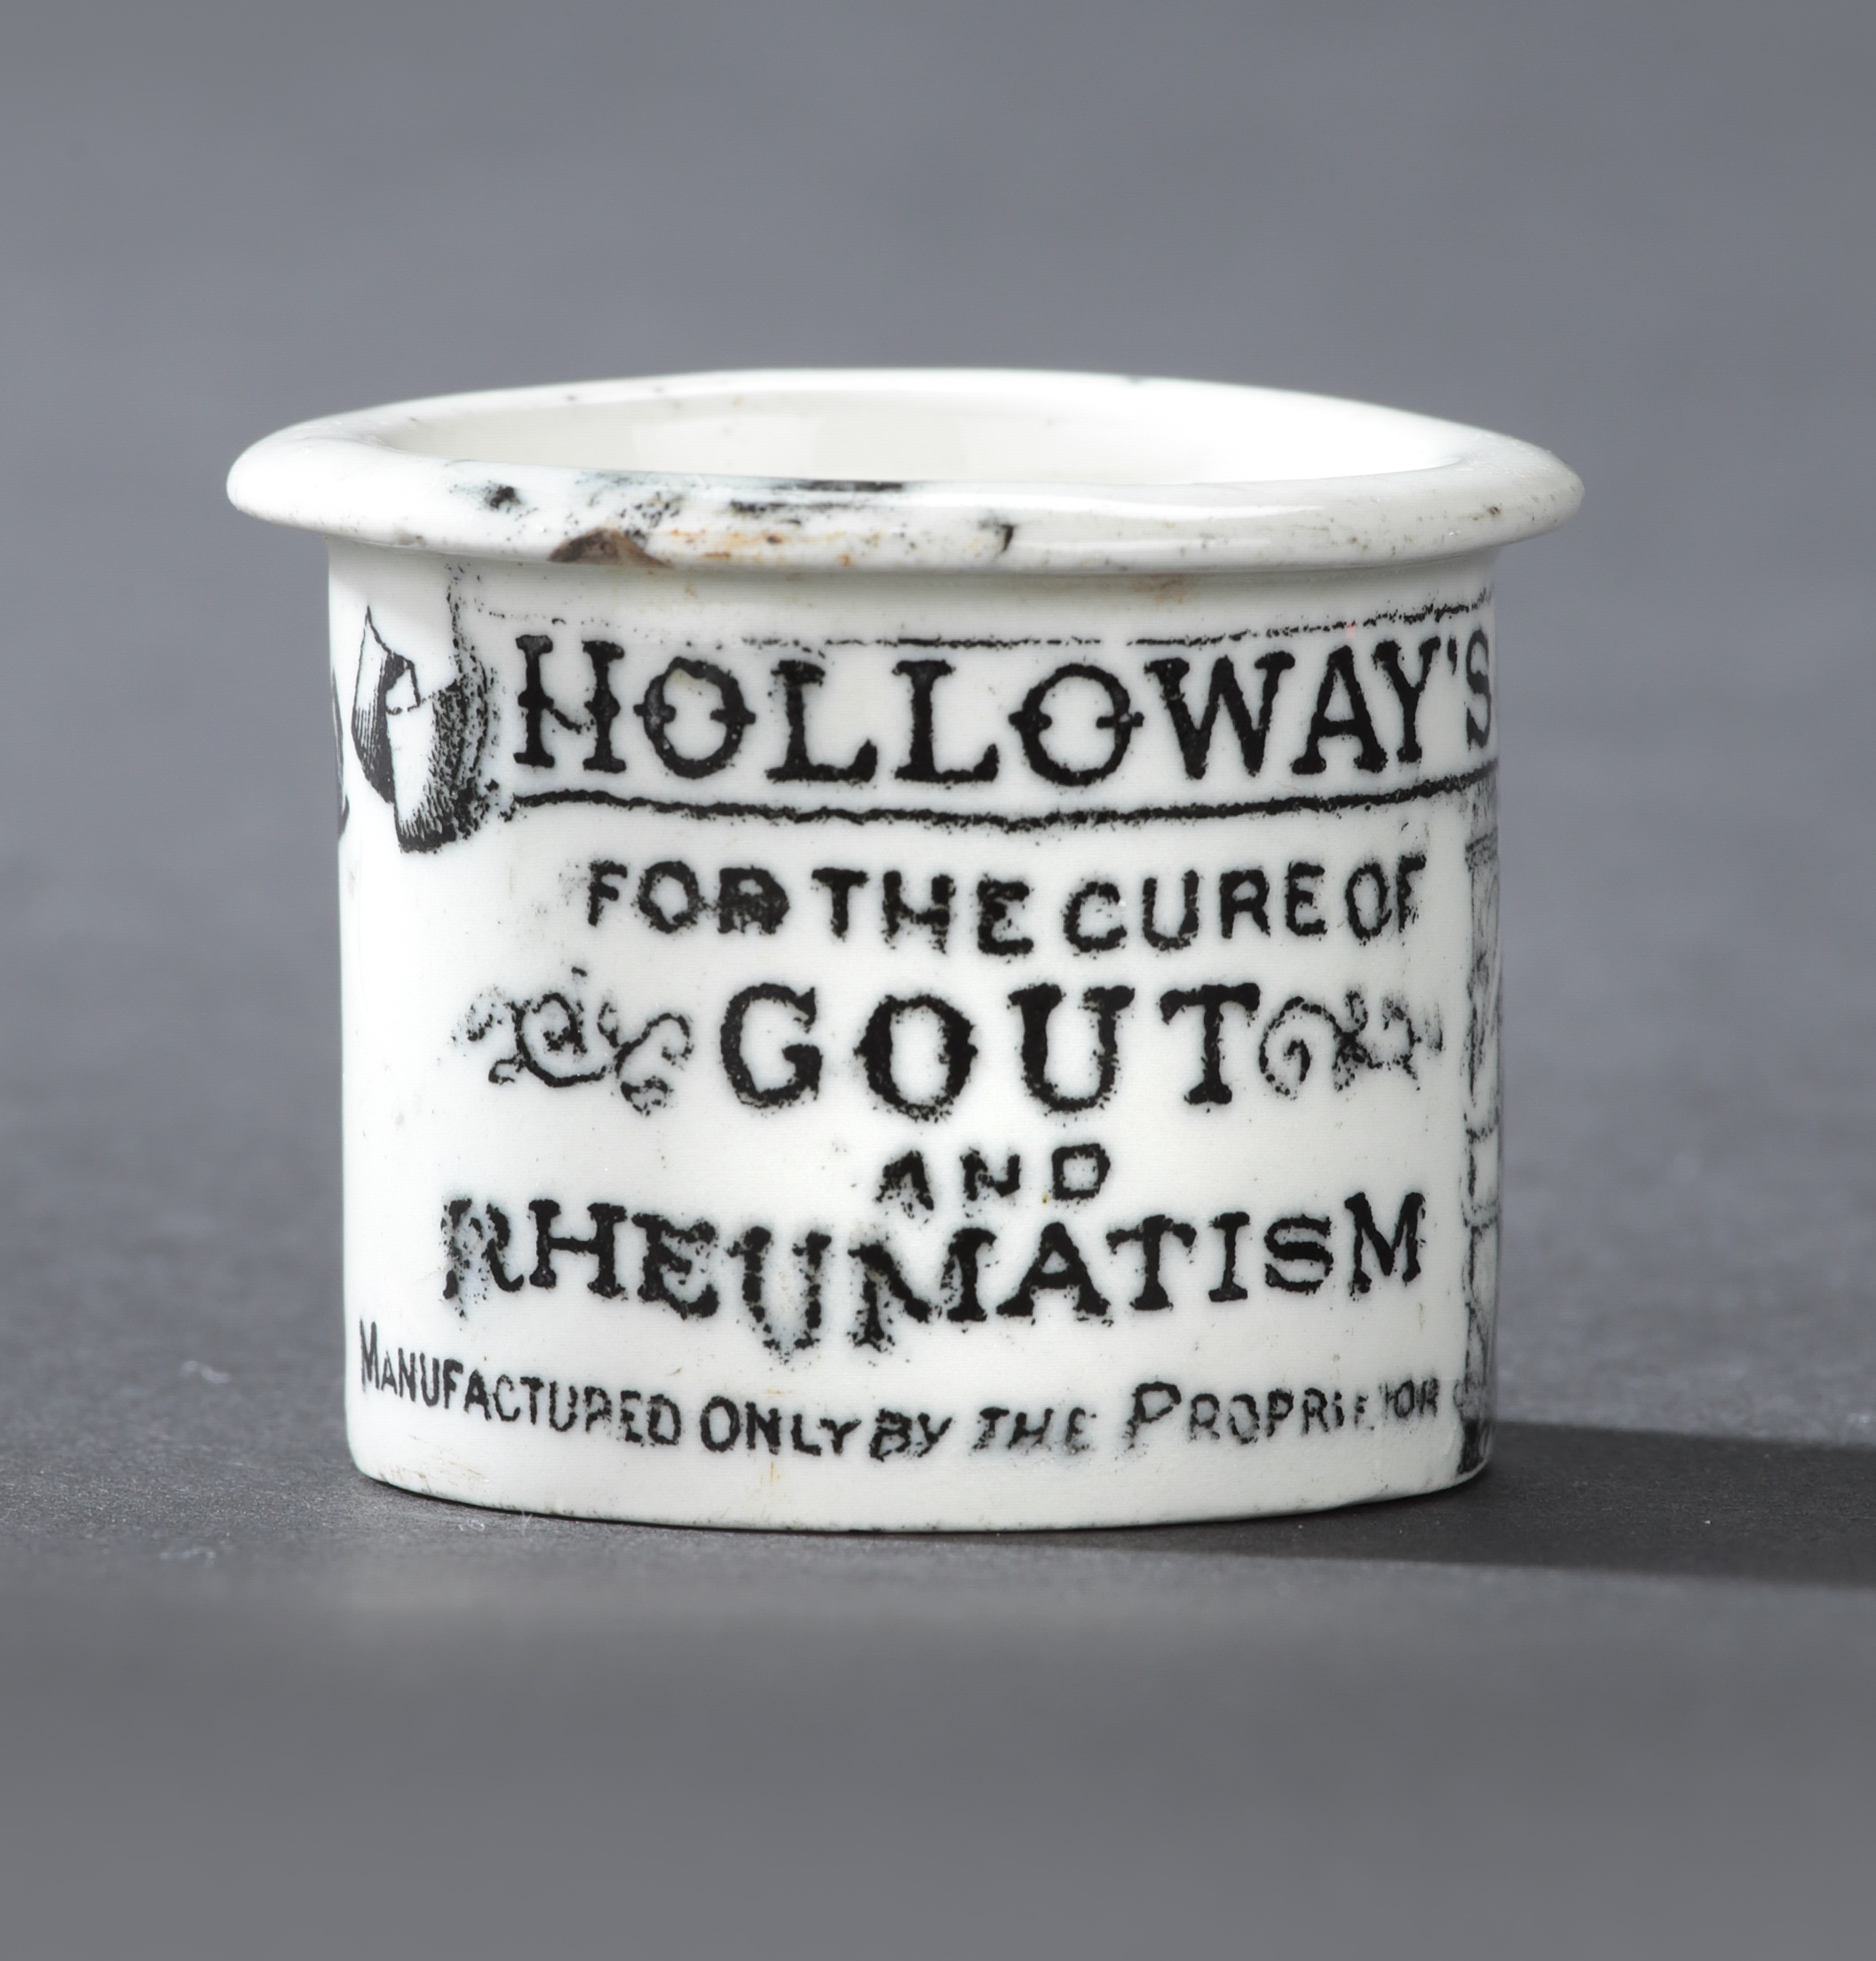 A ‘Holloways’ ointment jar for curing gout and rheumatism, c.1880s.